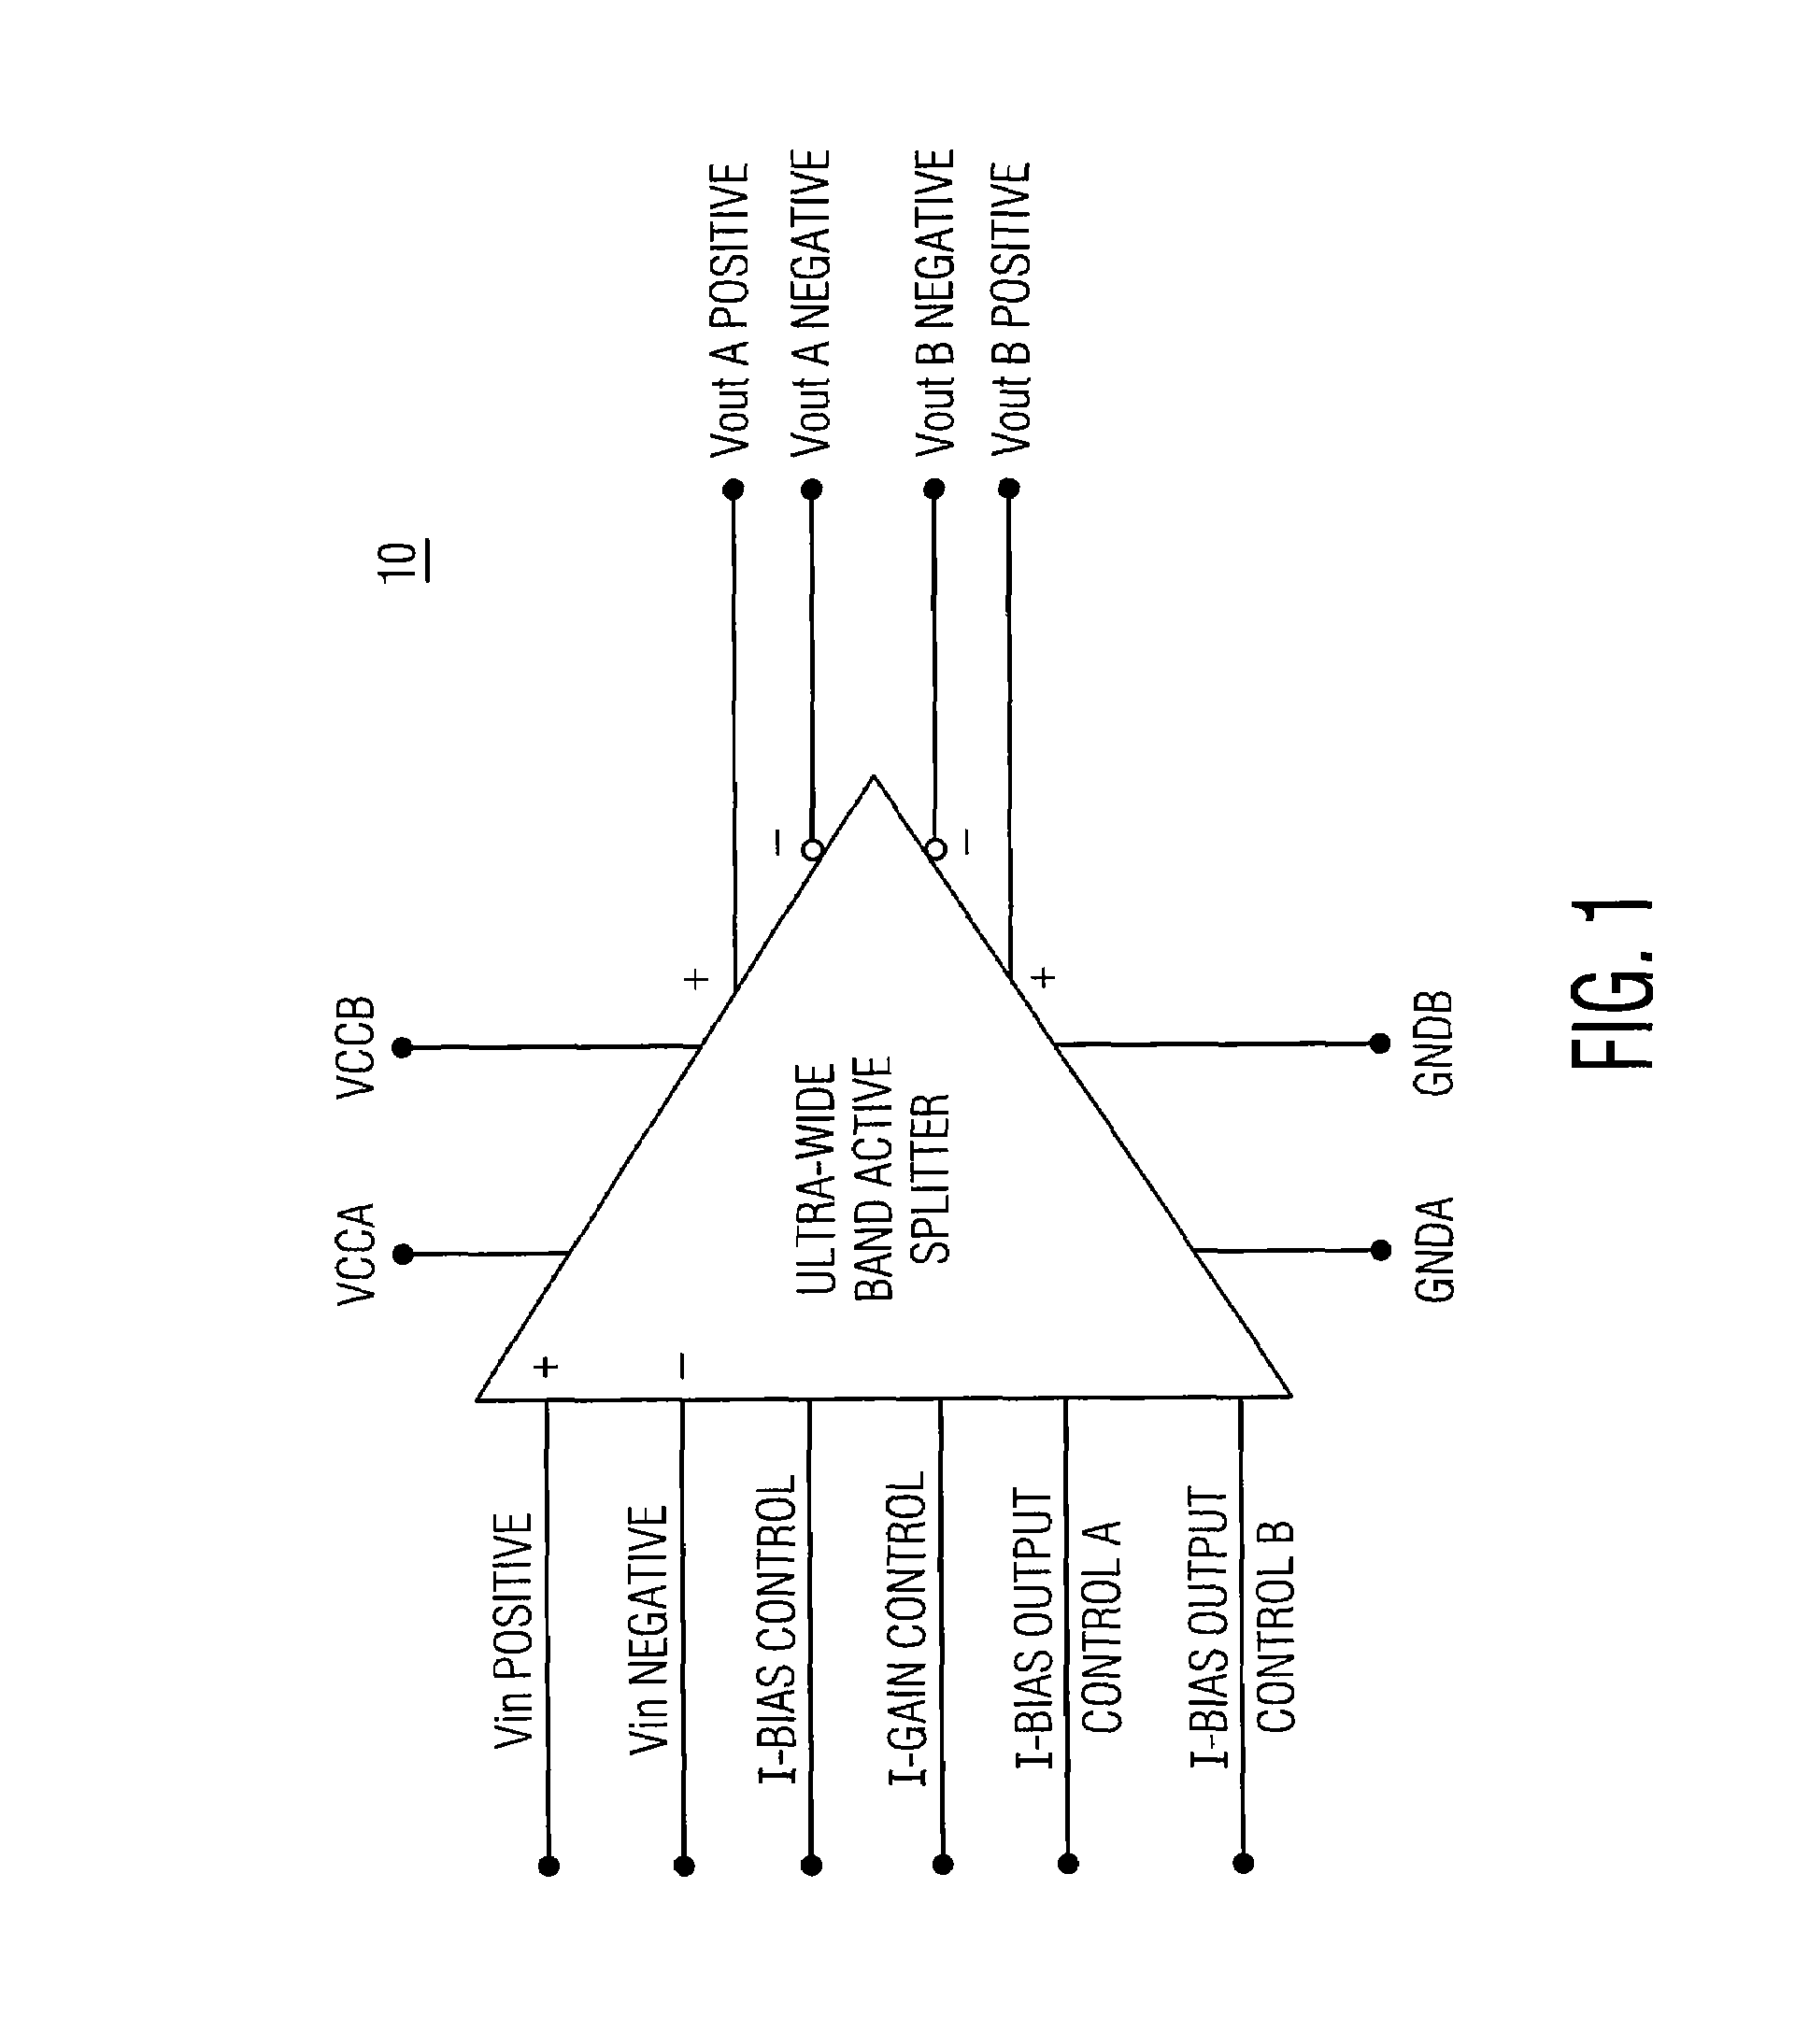 Ultra wide band, differential input/output, high frequency active splitter in an integrated circuit